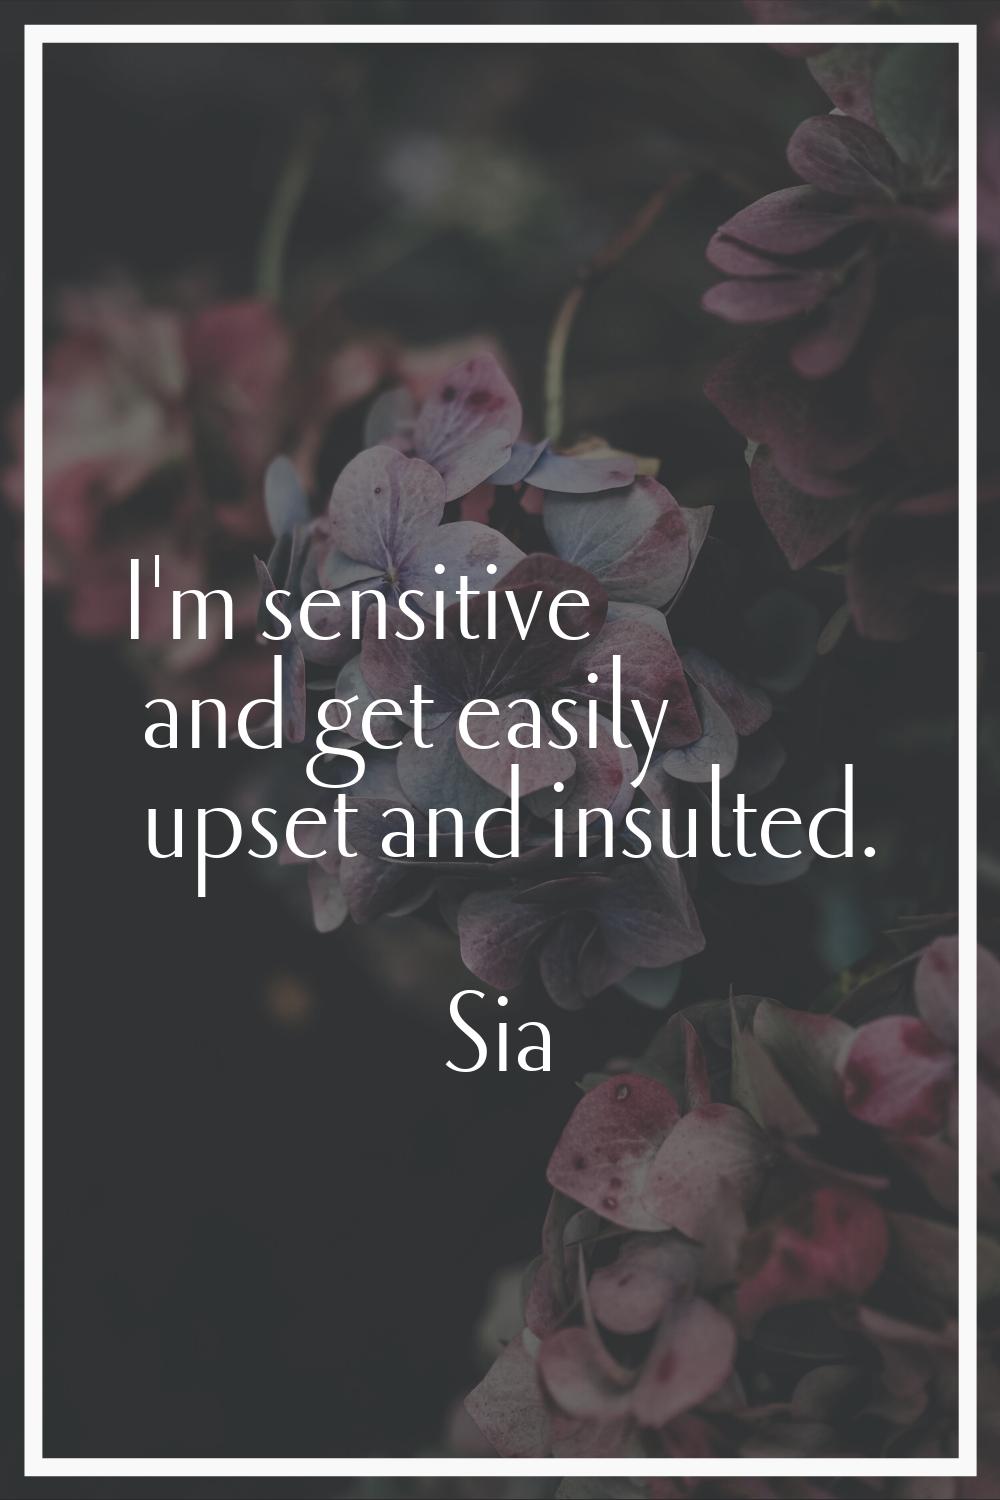 I'm sensitive and get easily upset and insulted.